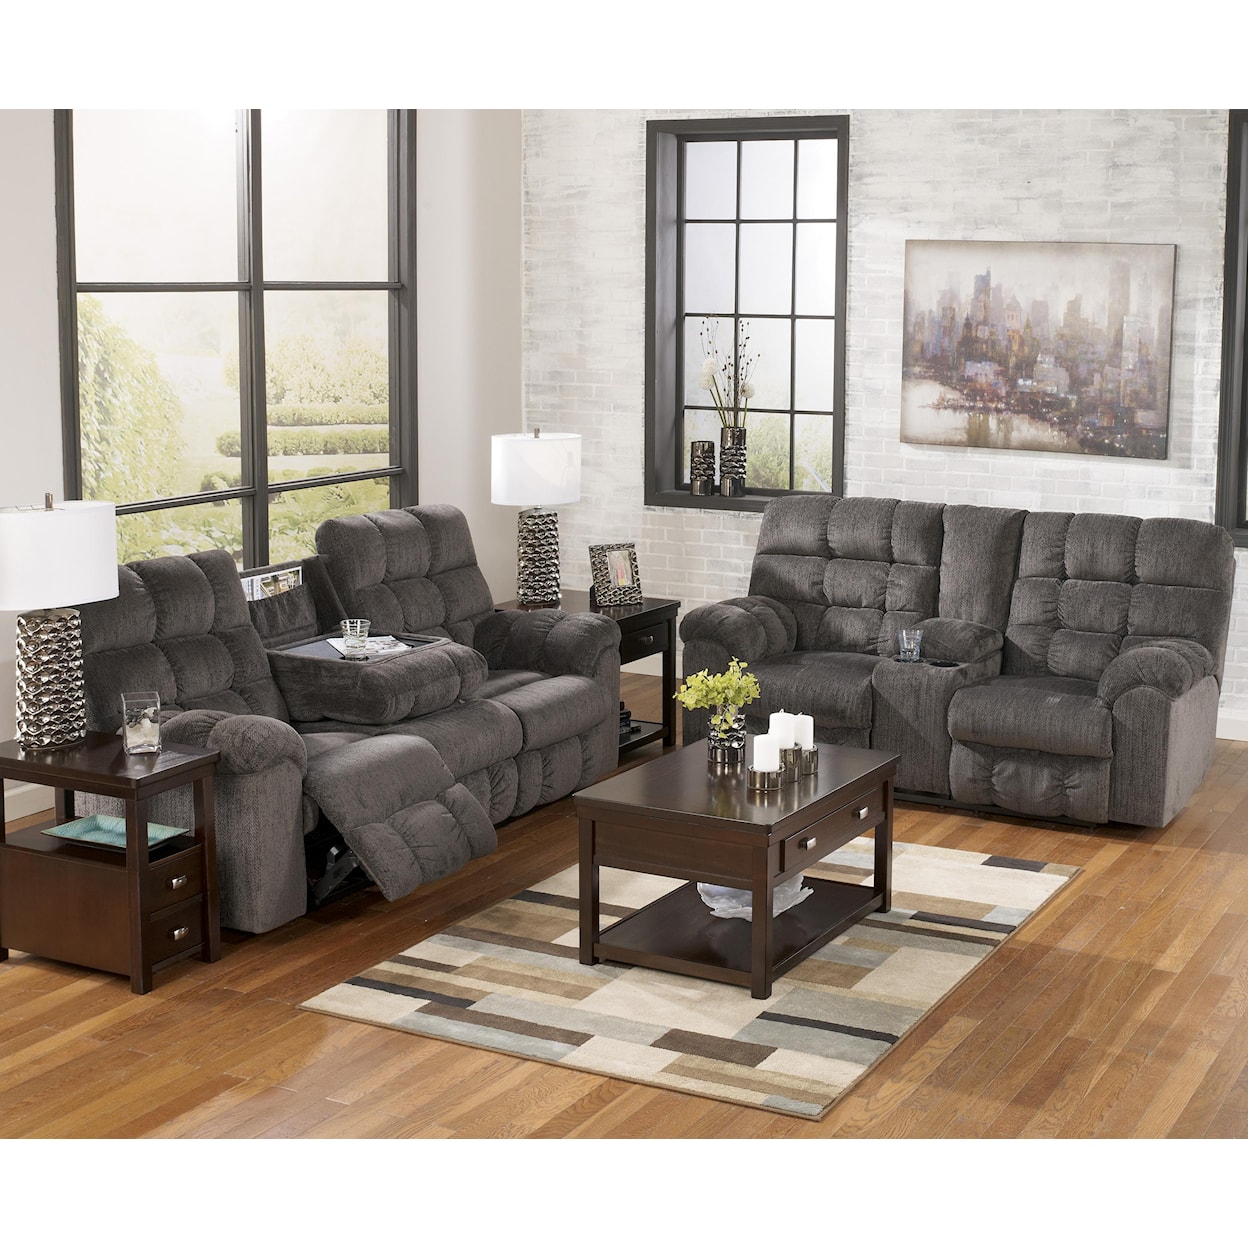 Signature Design by Ashley Acieona Reclining Sofa with Drop Down Table